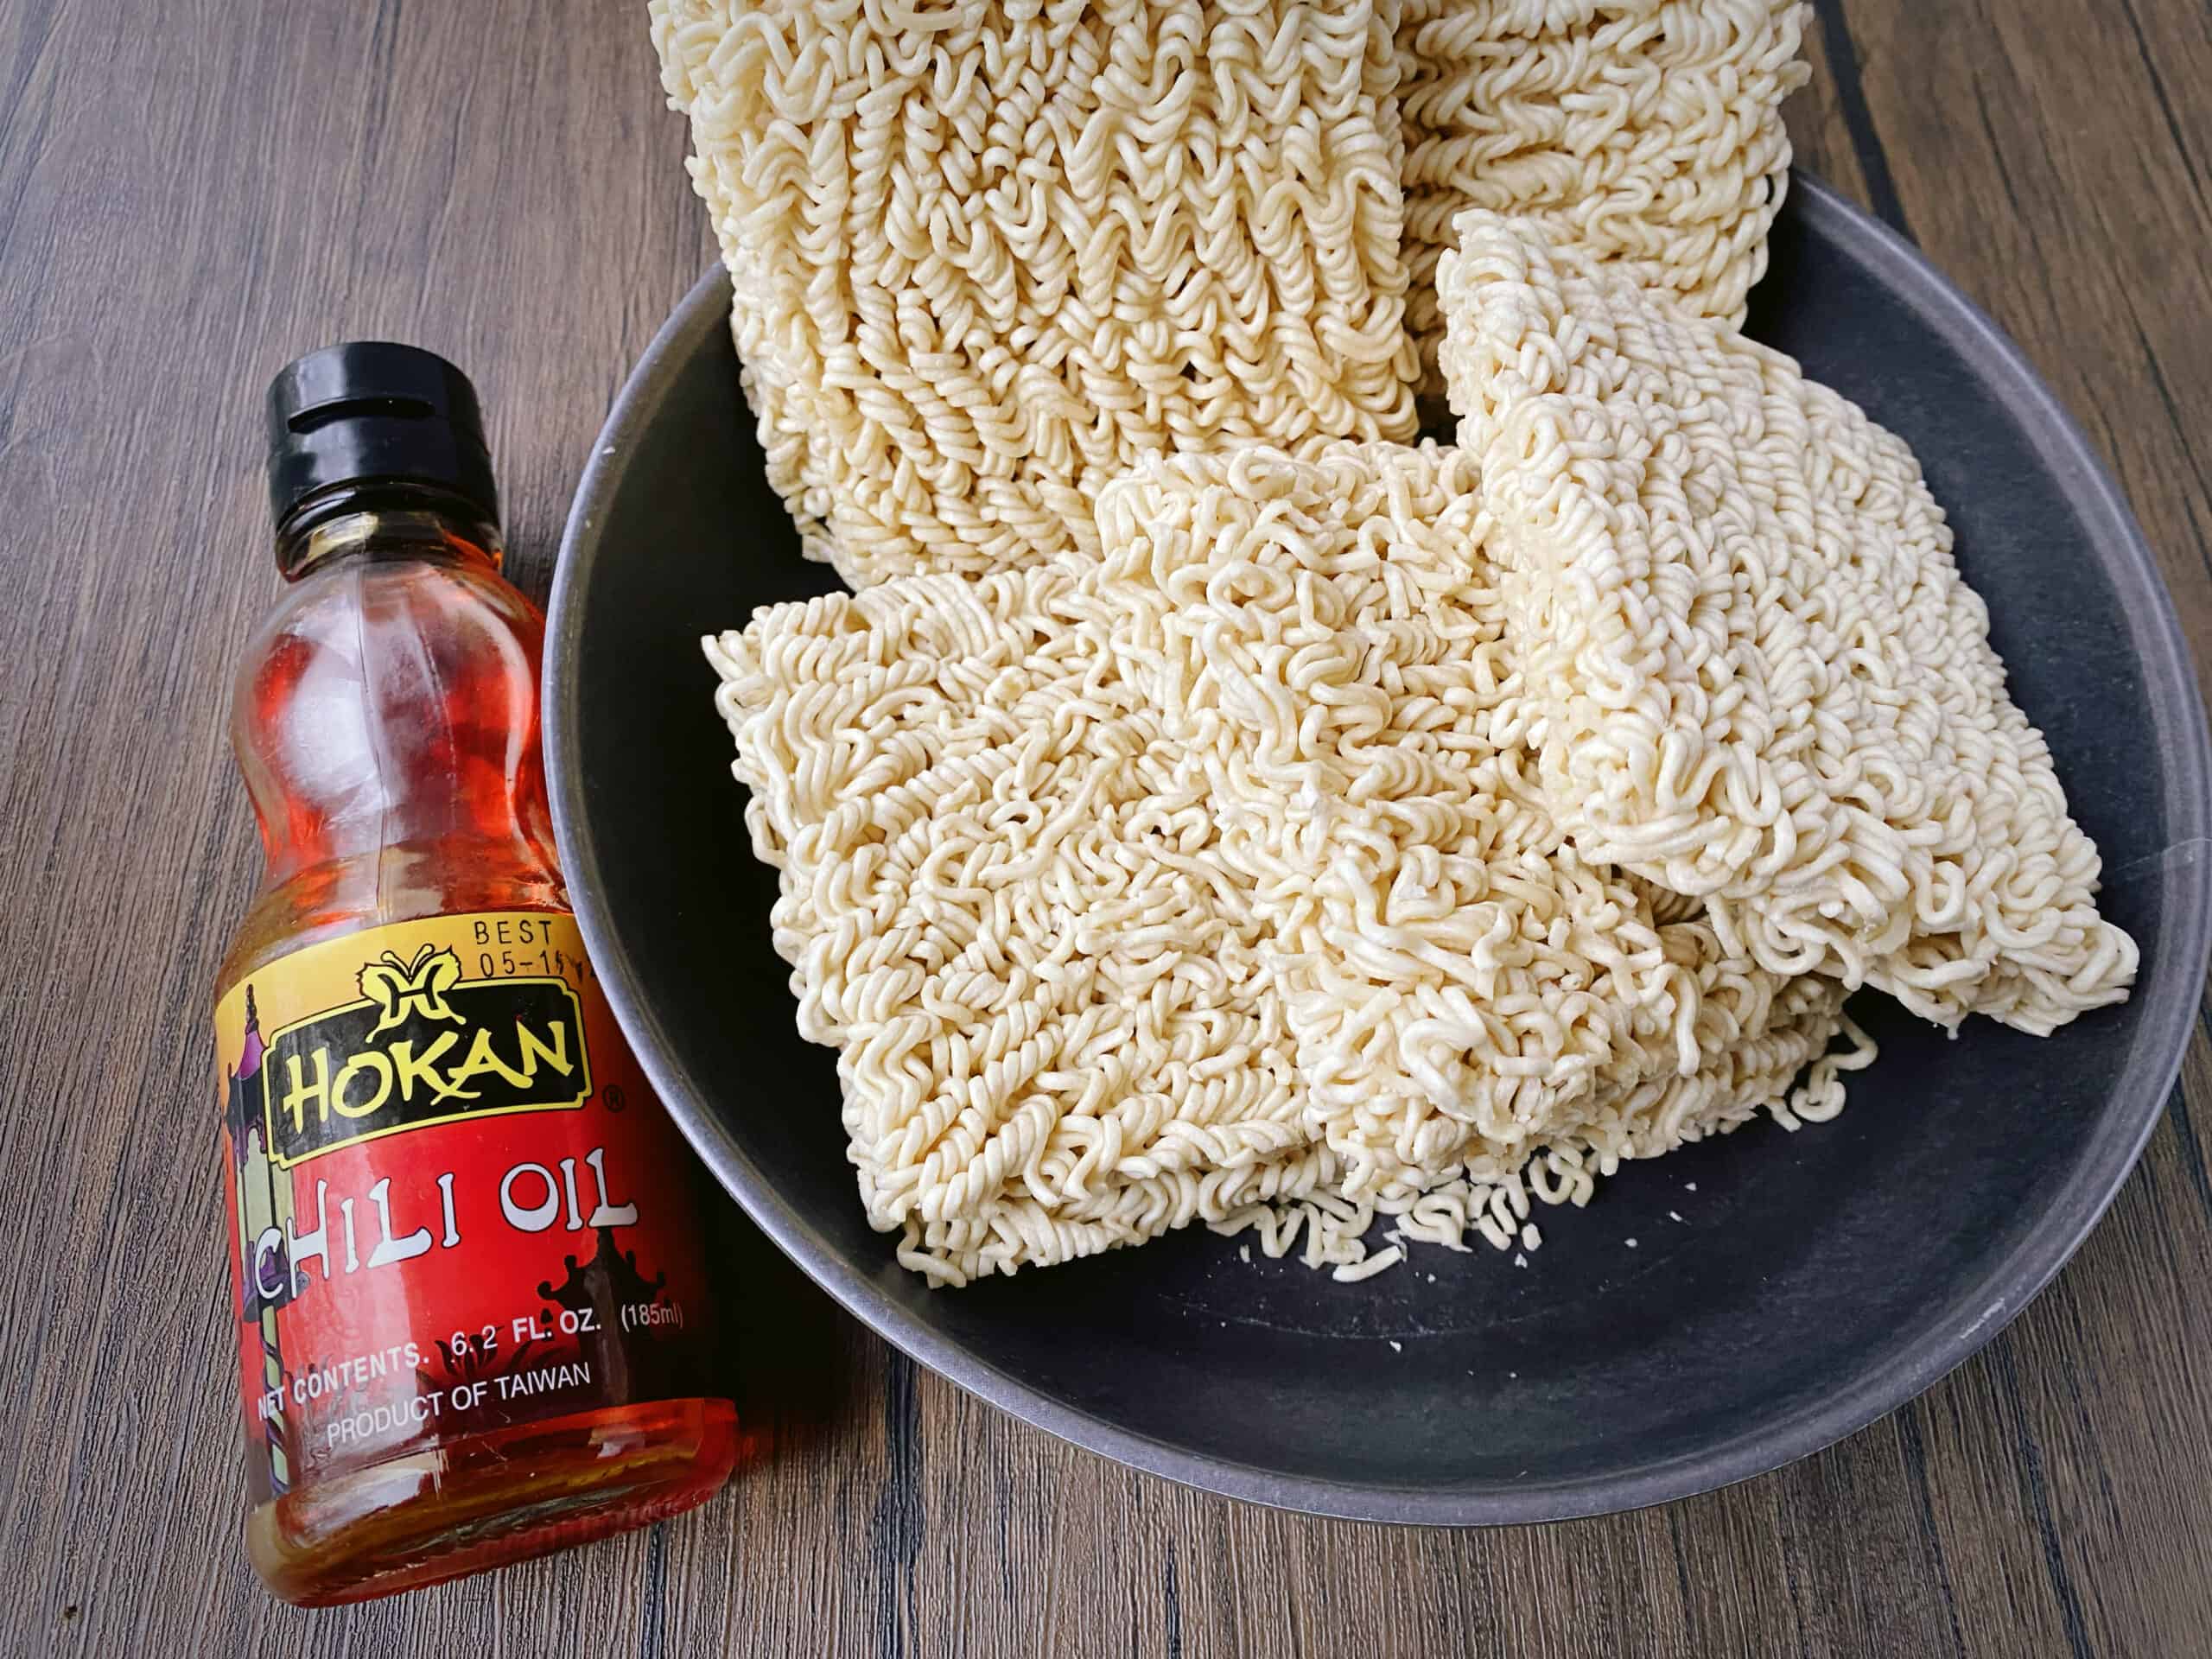 bottle of chili oil next to 5 squares of instant ramen noodles.